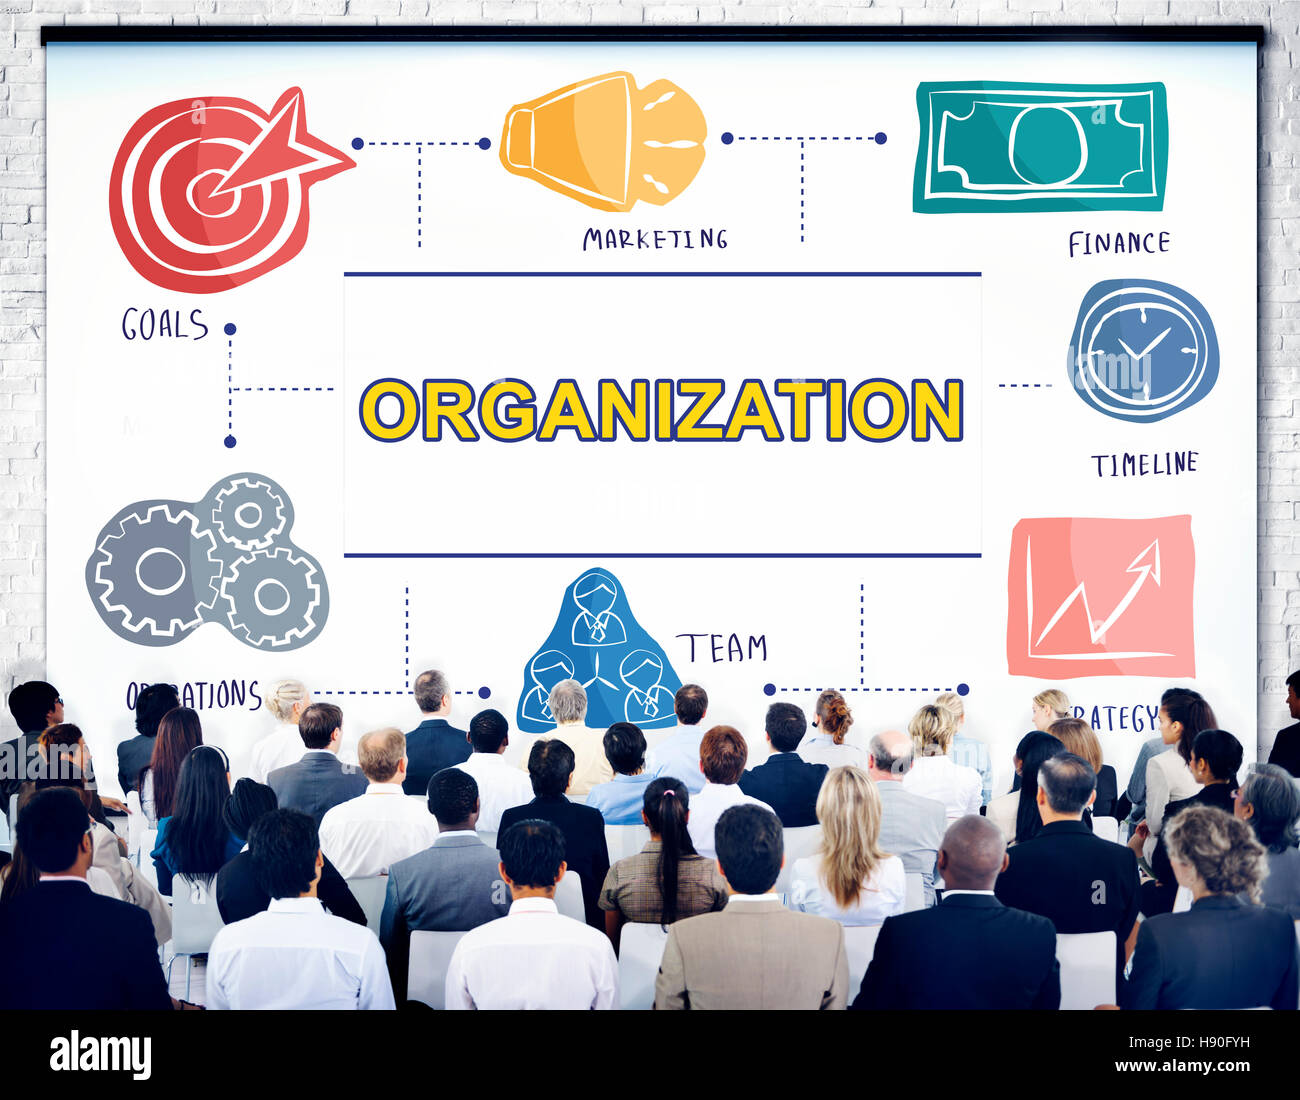 Organization Group Corporate Commitment Team Concept Stock Photo